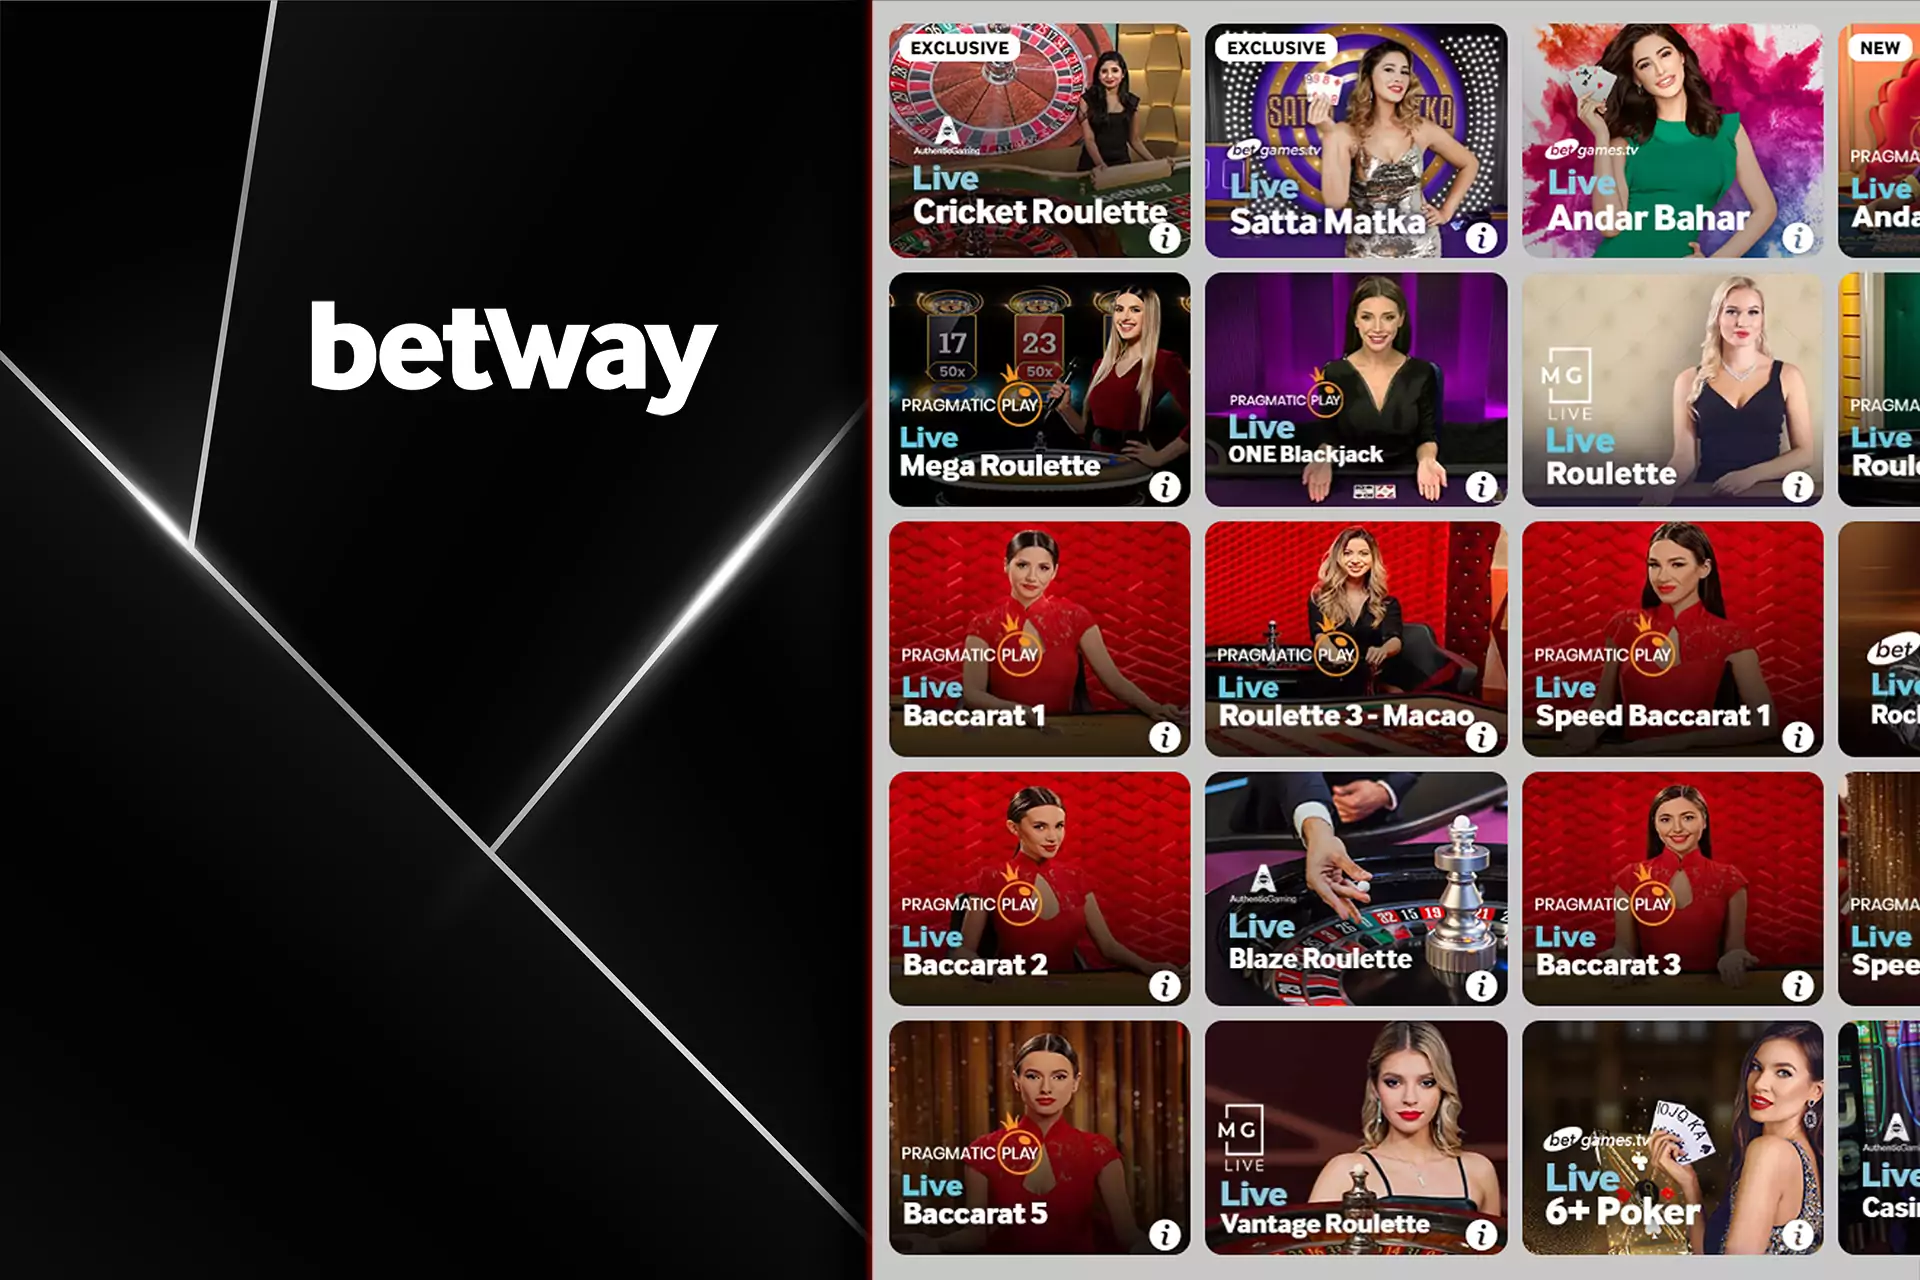 Betway works under the Malta license and is available in many countries of the world.